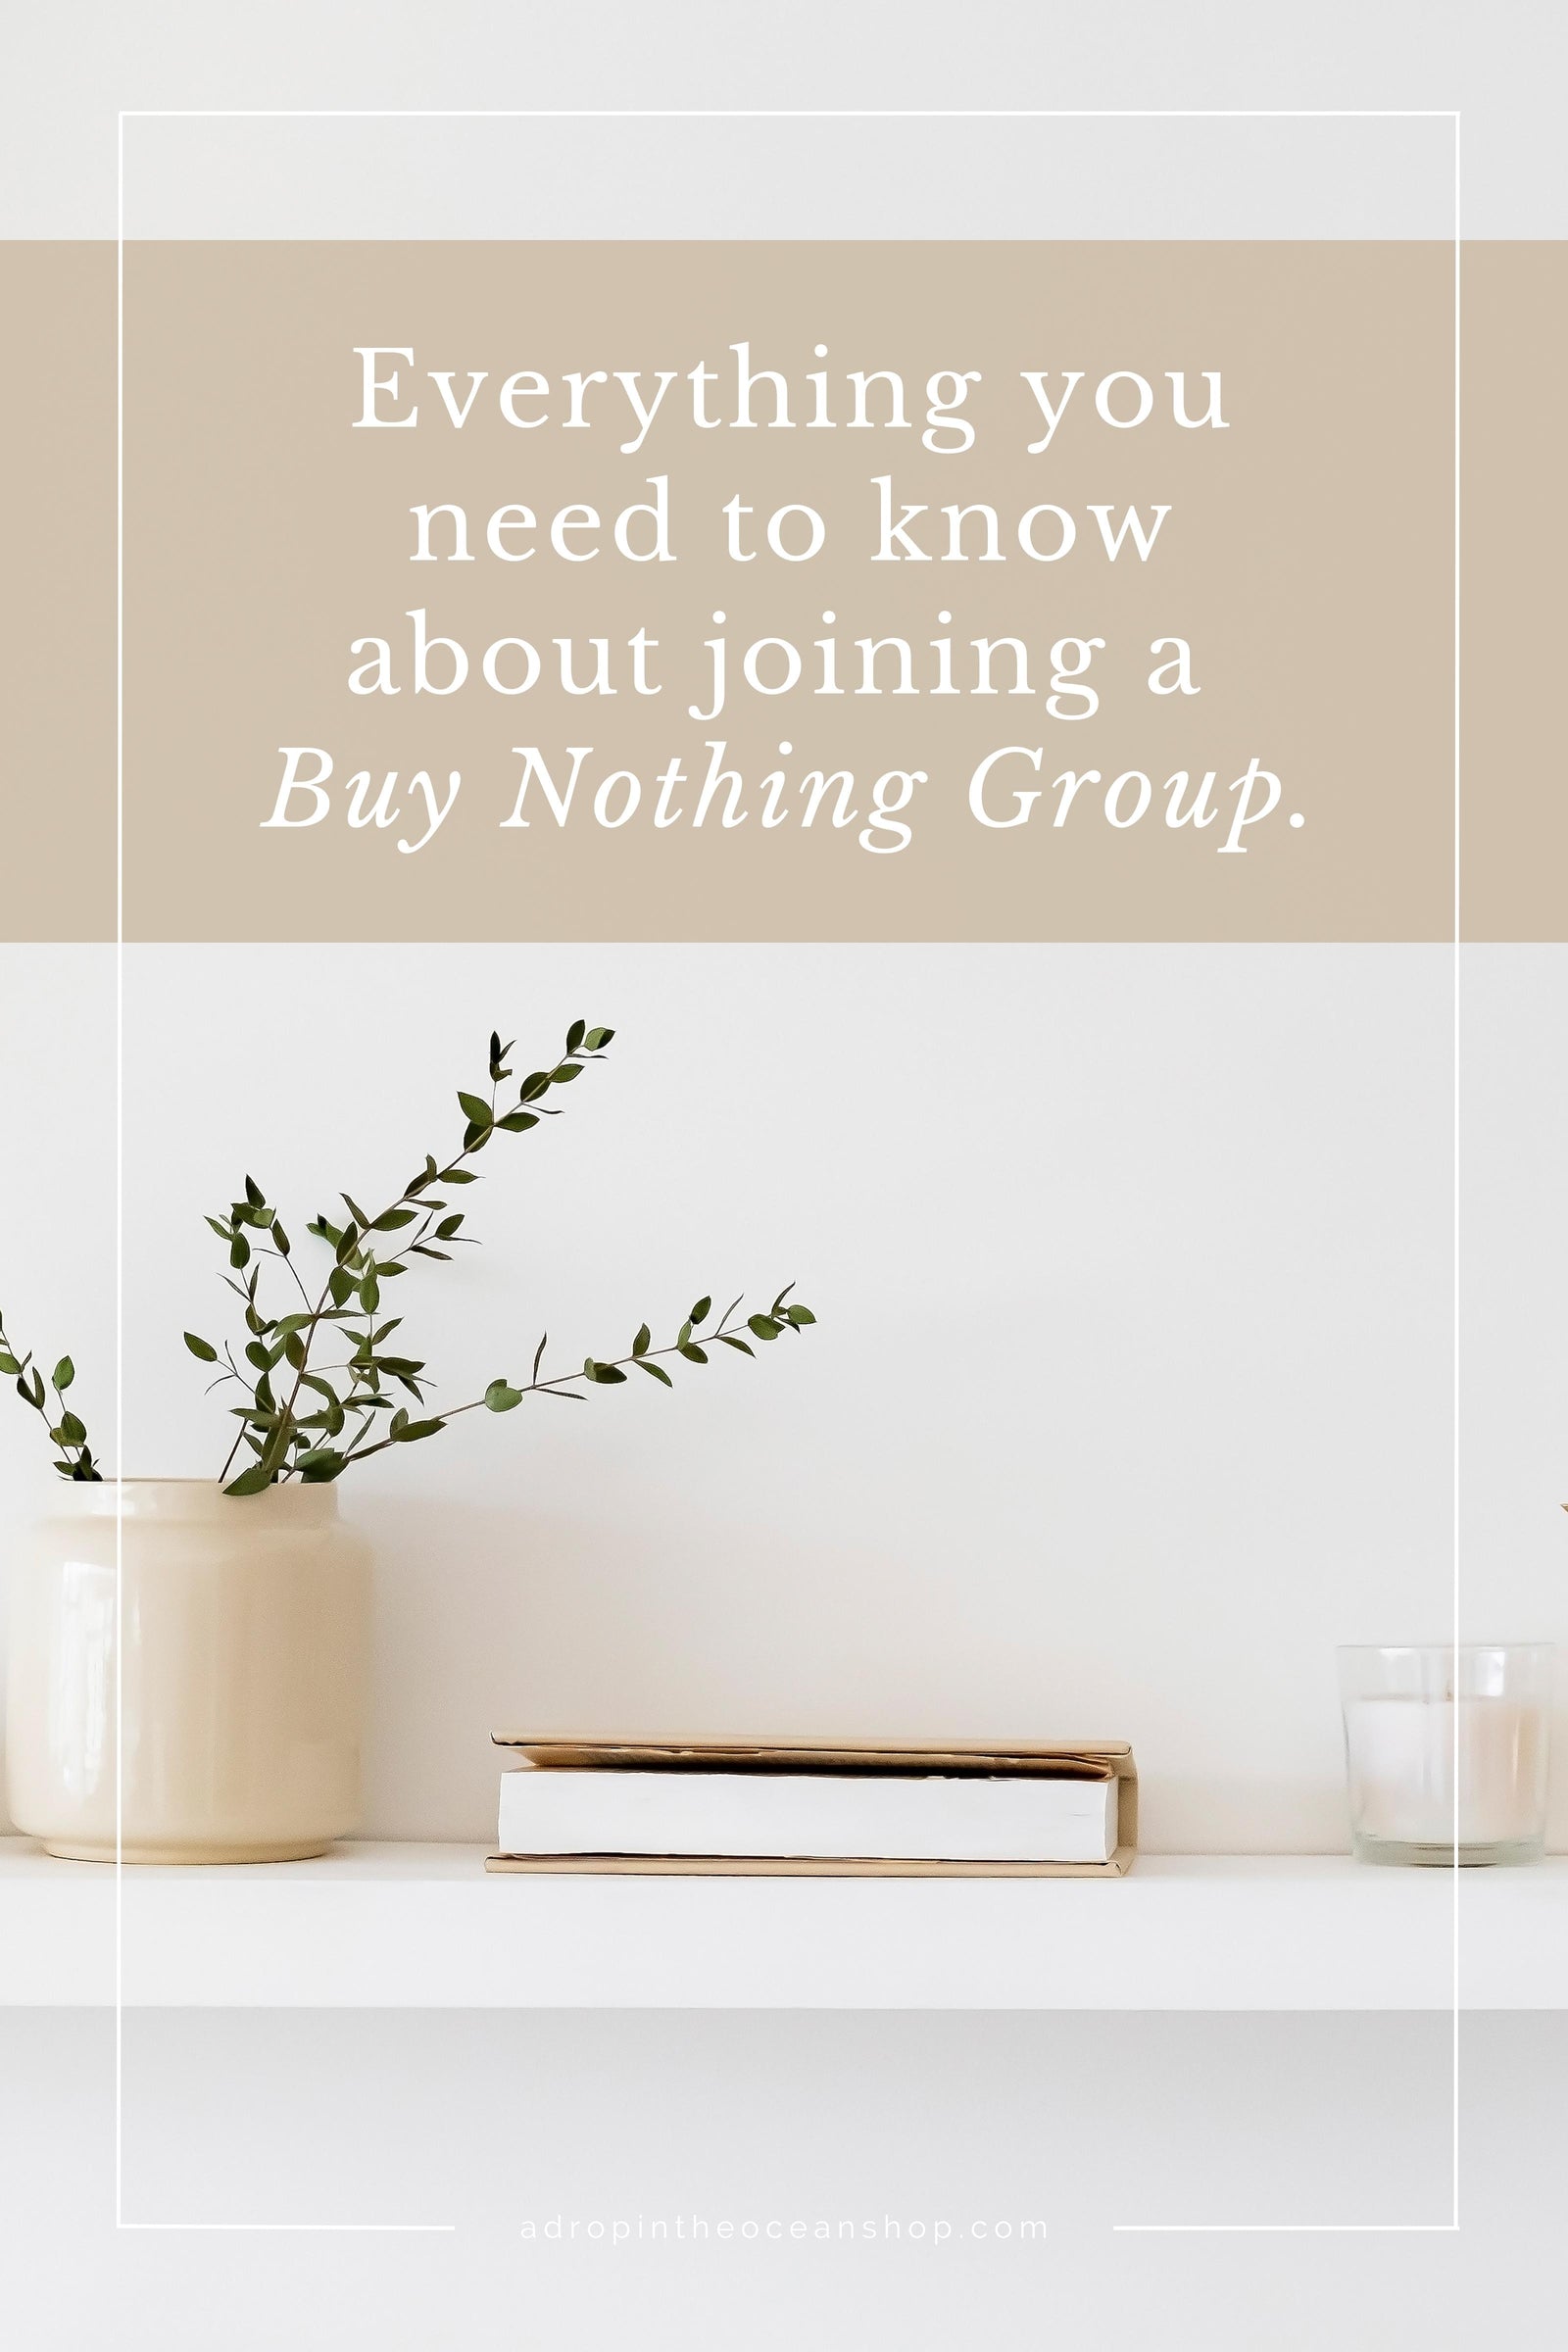 What is a Buy Nothing Group and why should you join one?